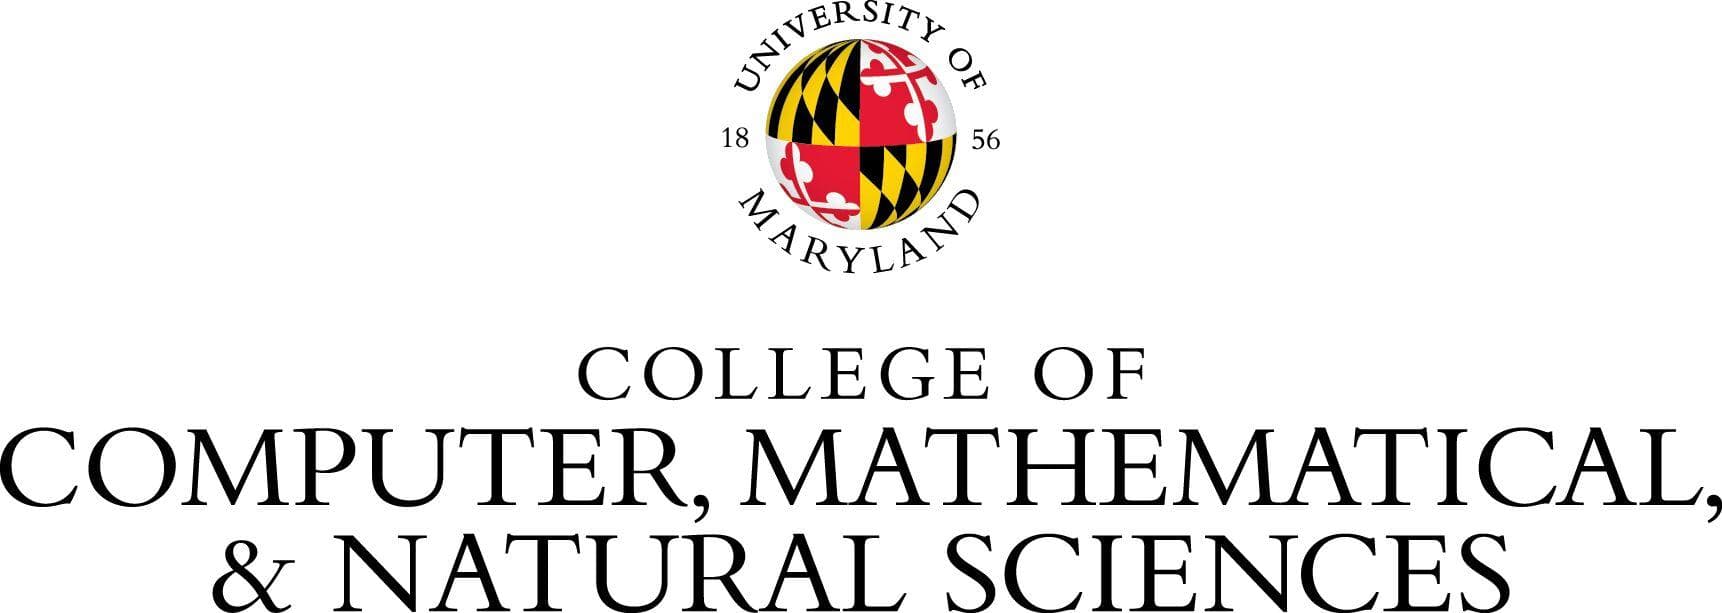 College of Computer, Mathematical, and Natural Sciences main college logo.